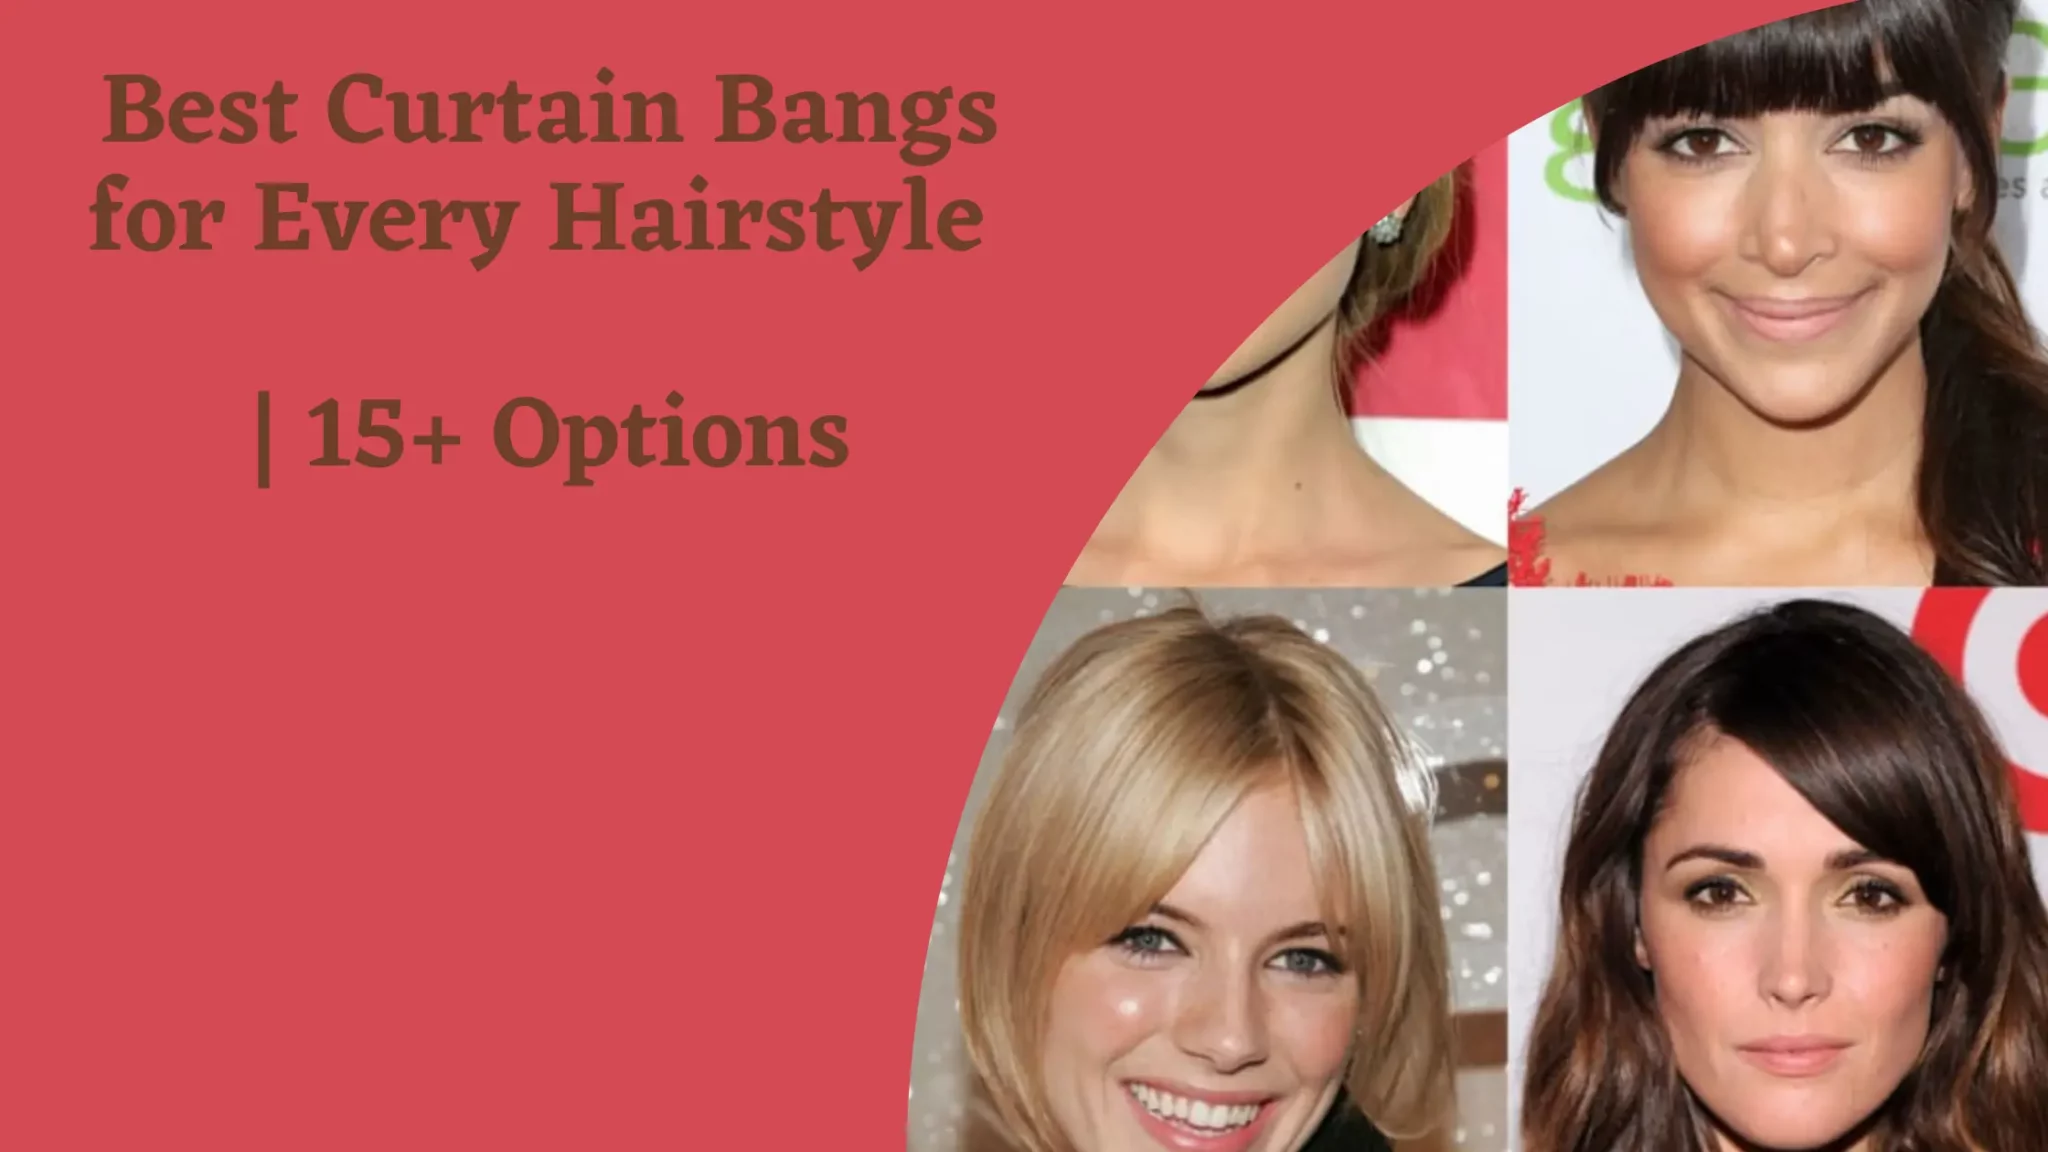 Best Curtain Bangs for Every Hairstyle